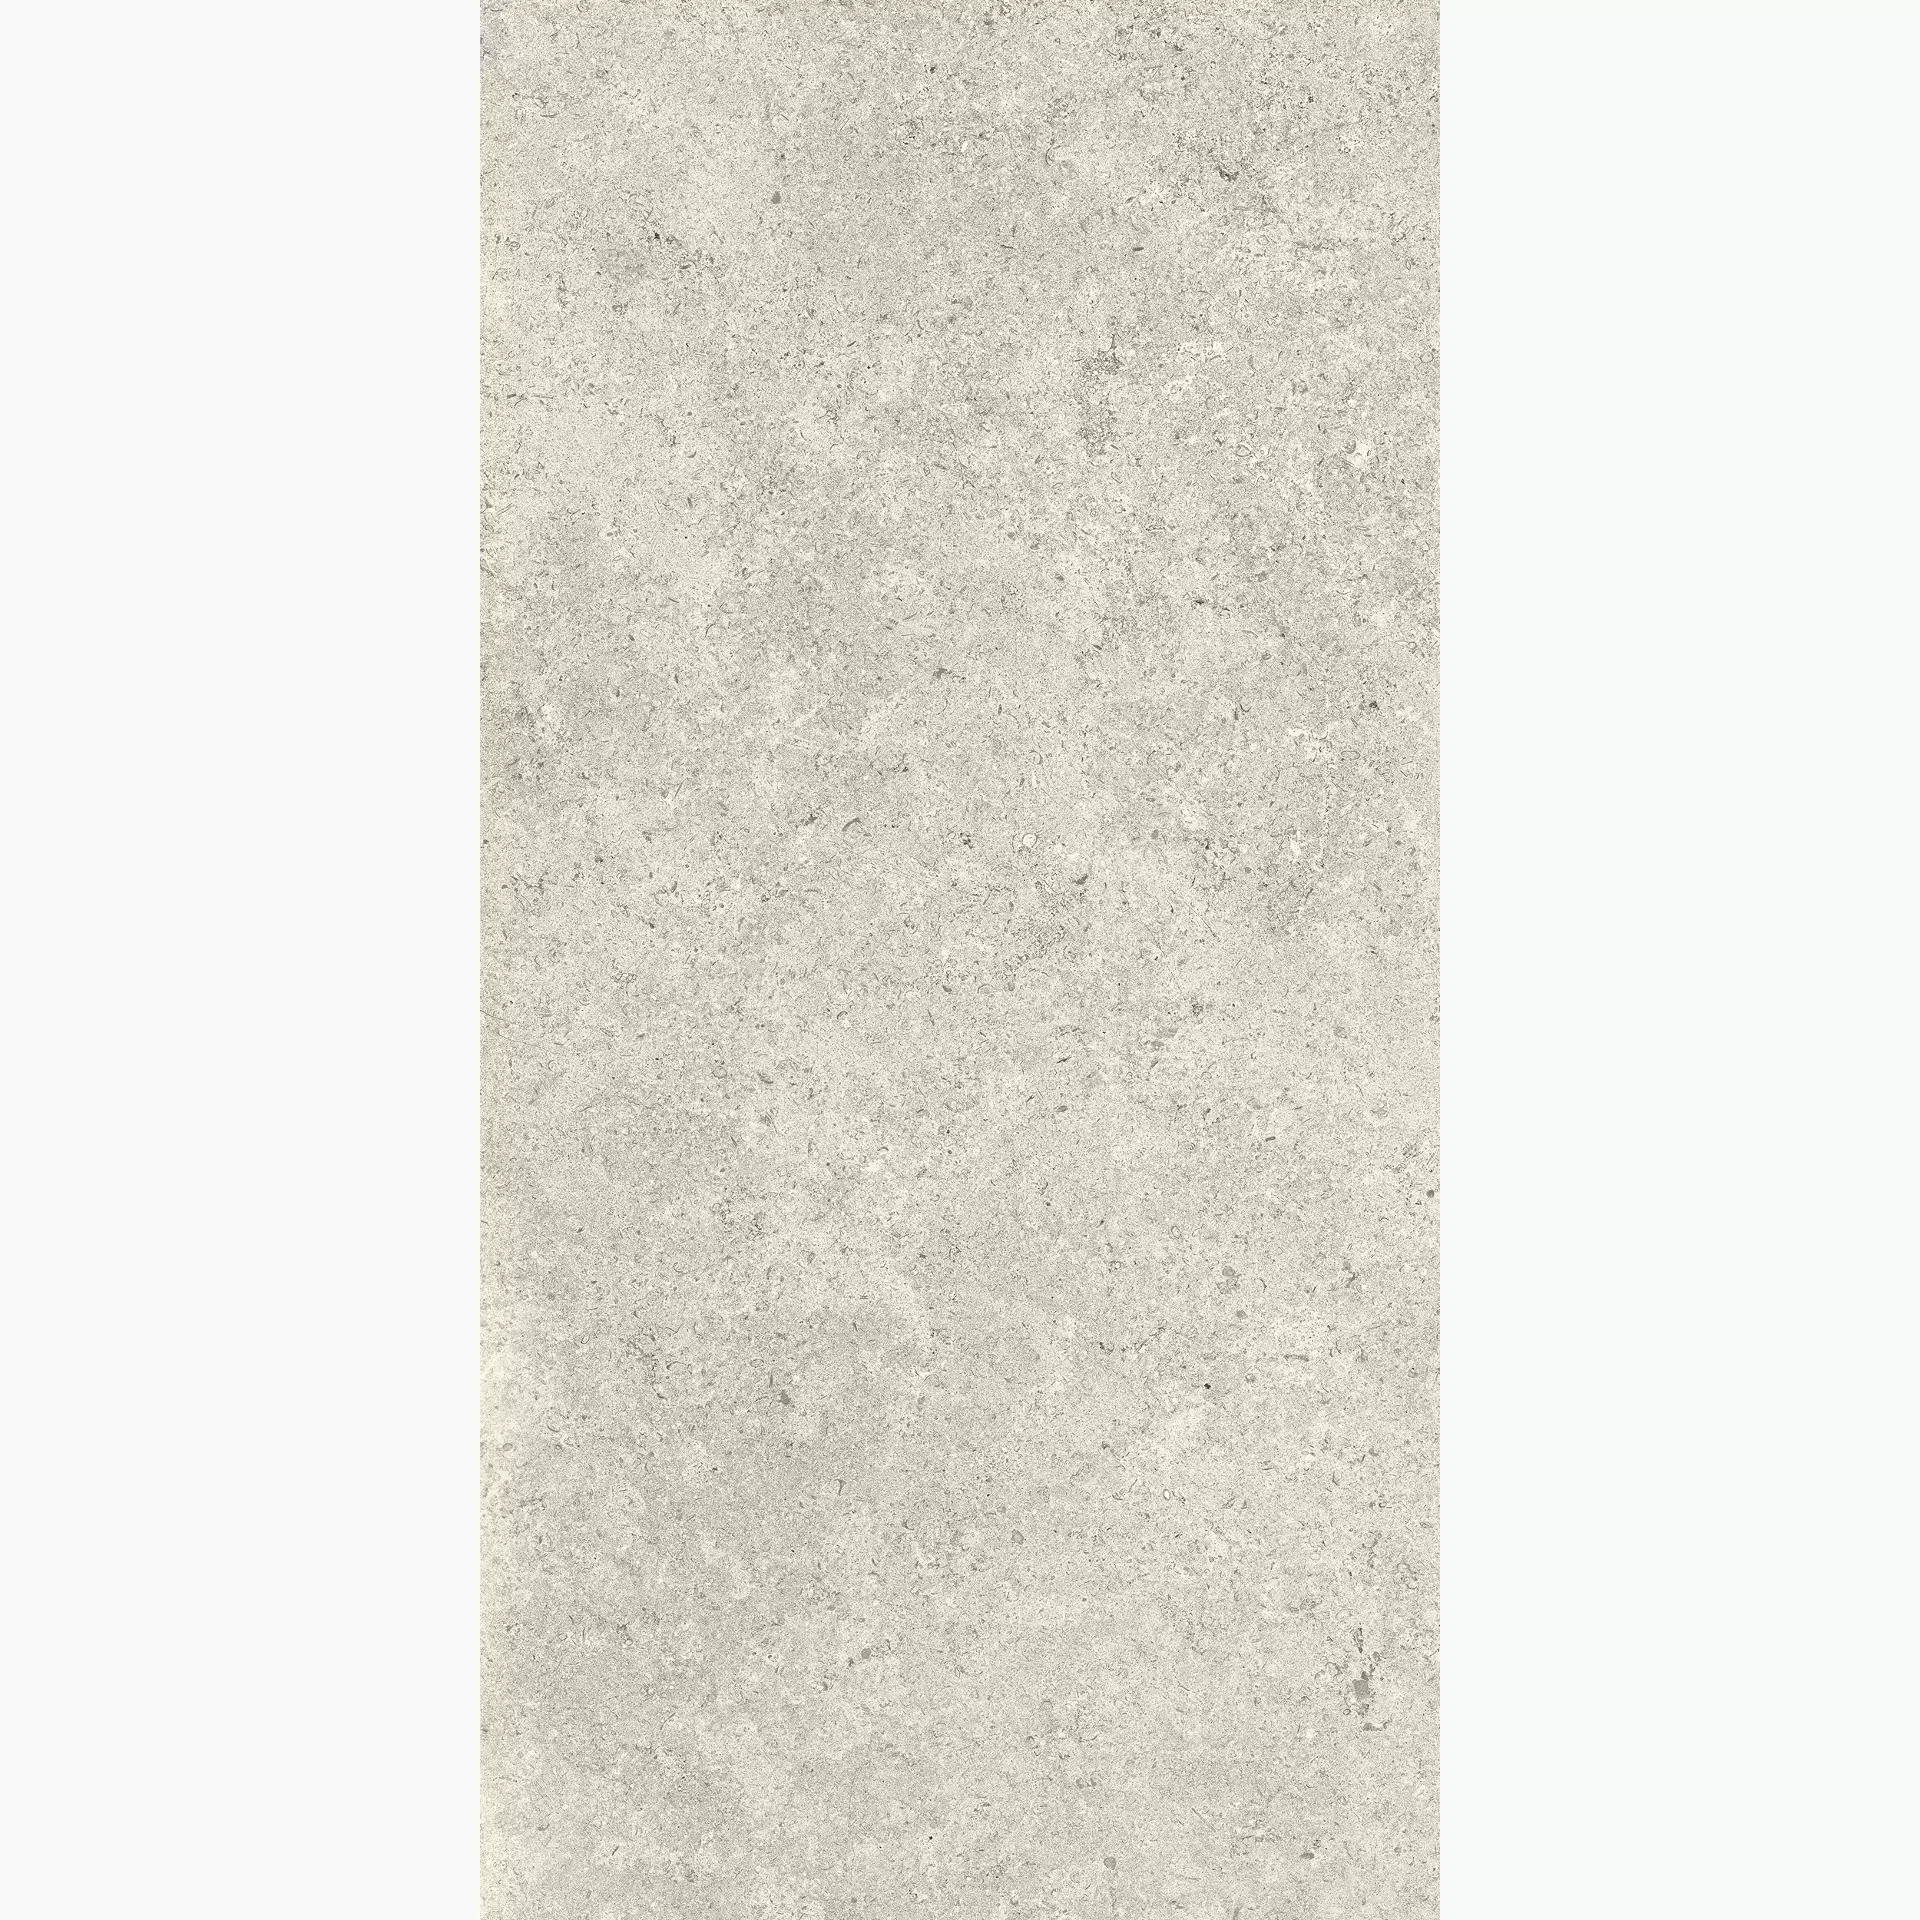 Cottodeste Pura Pearl Honed Protect EG-PRH2 30x60cm rectified 14mm